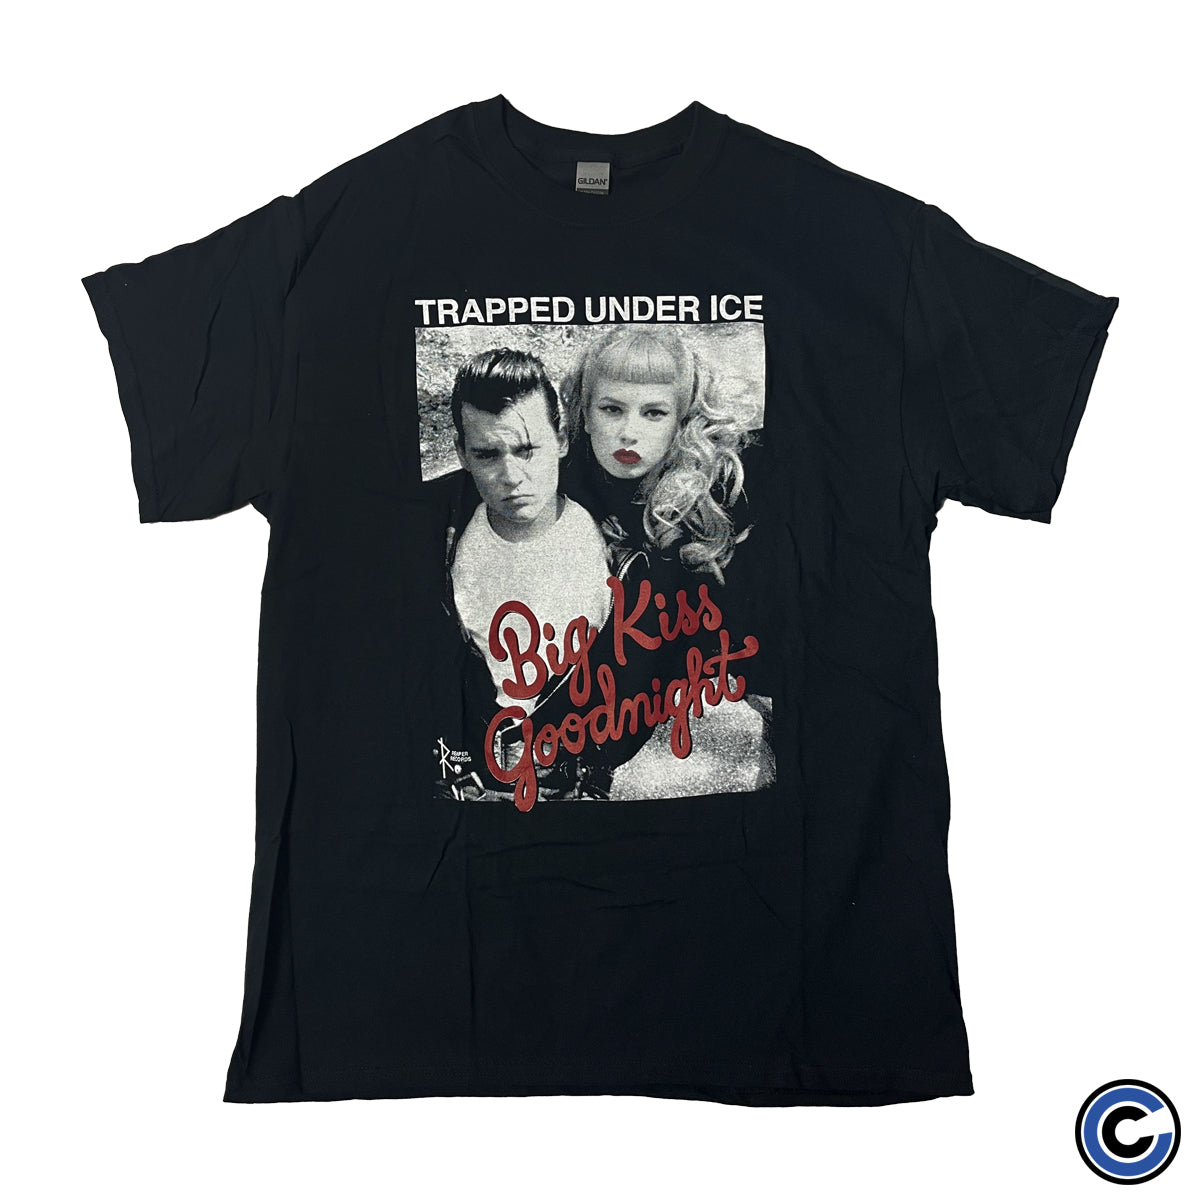 Trapped Under Ice "Cry Baby" Shirt